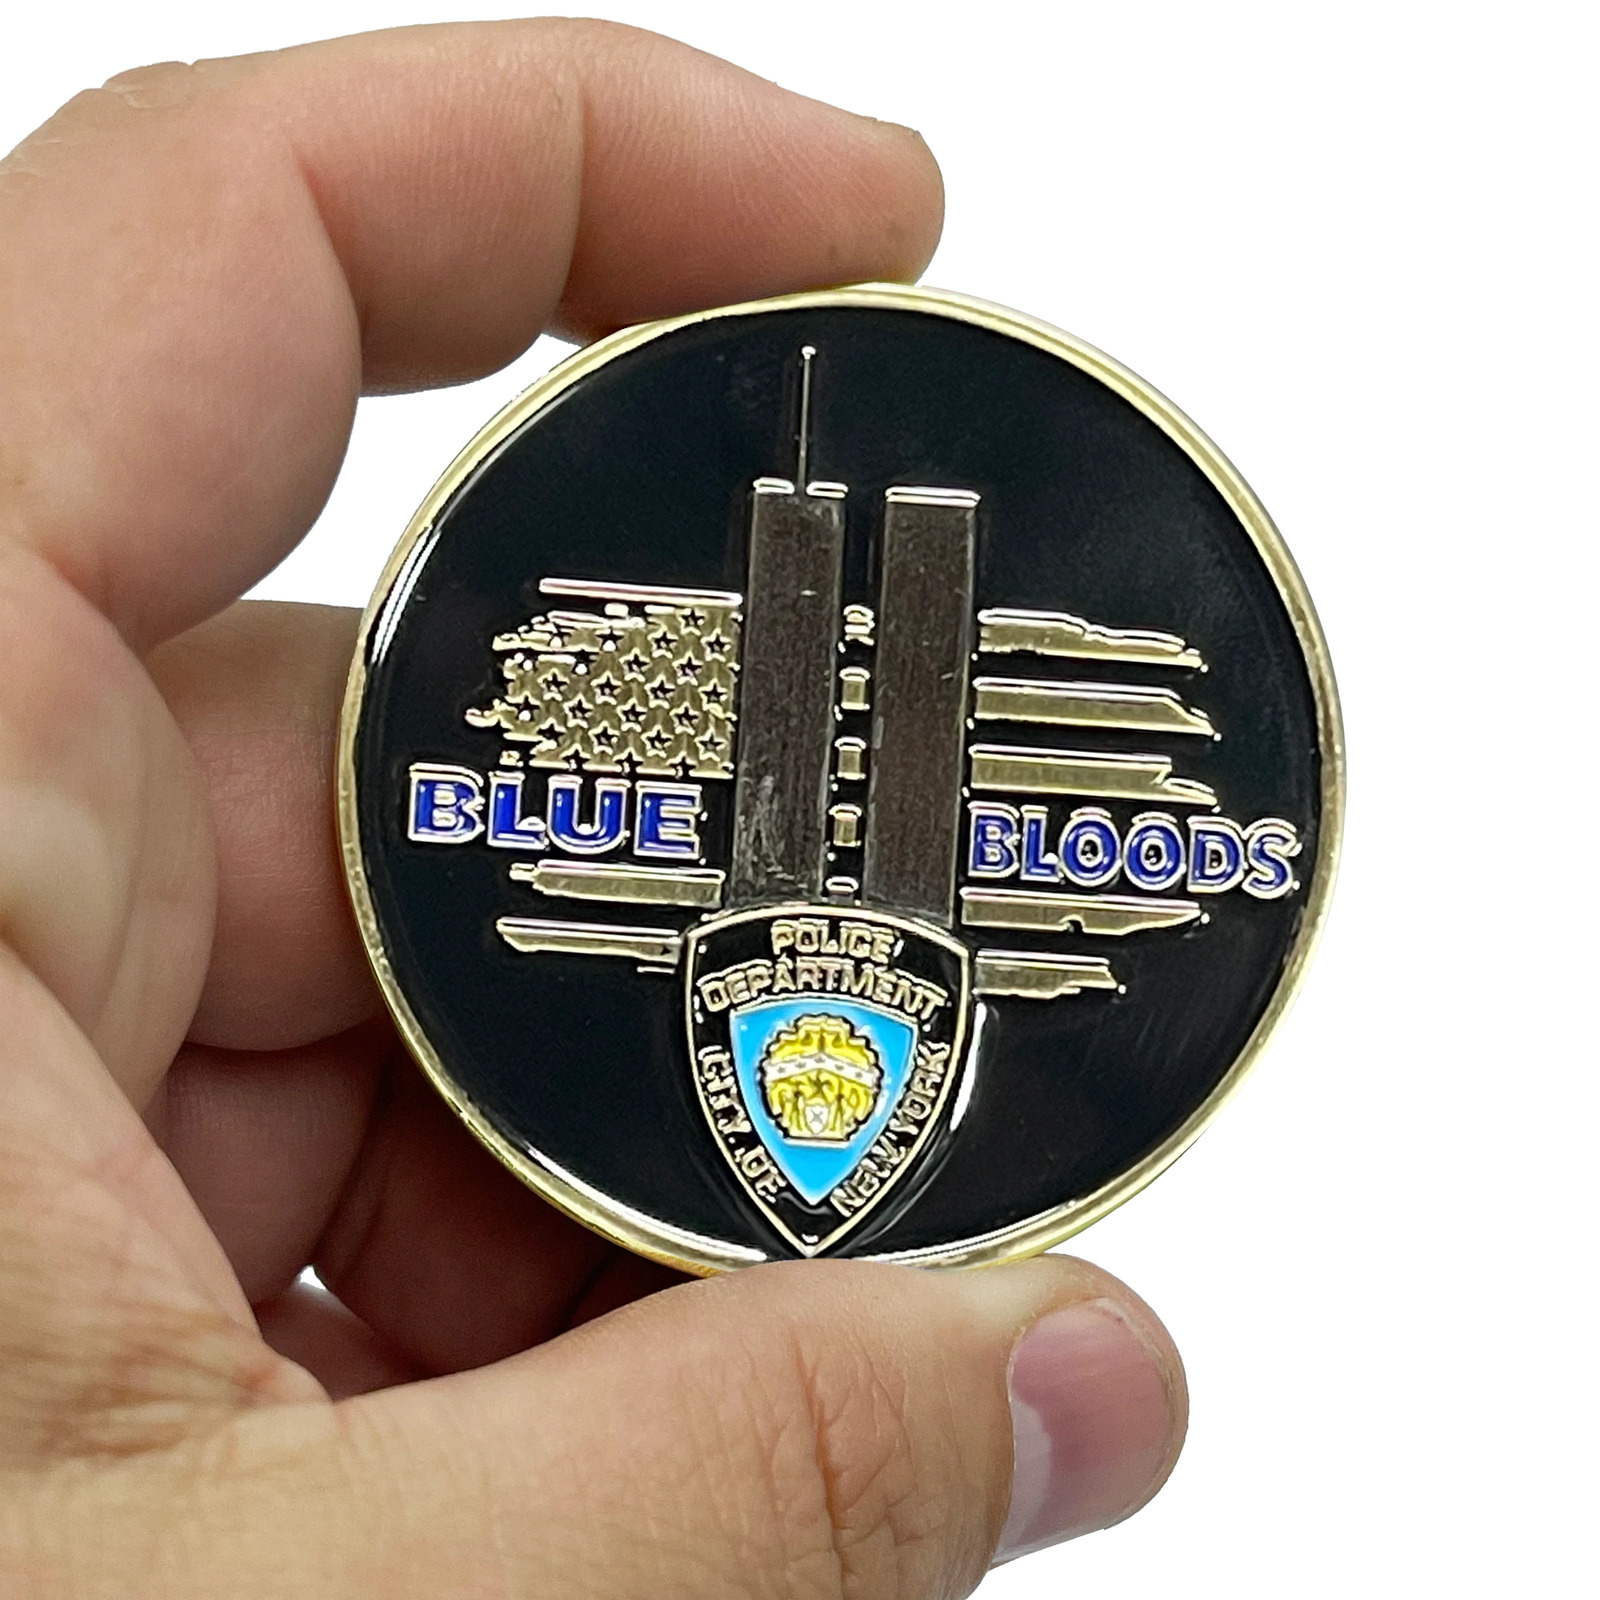 BL11-004 Blue Bloods 9/11 NEVER AGAIN September 11th 20th Anniversary NYPD Chall